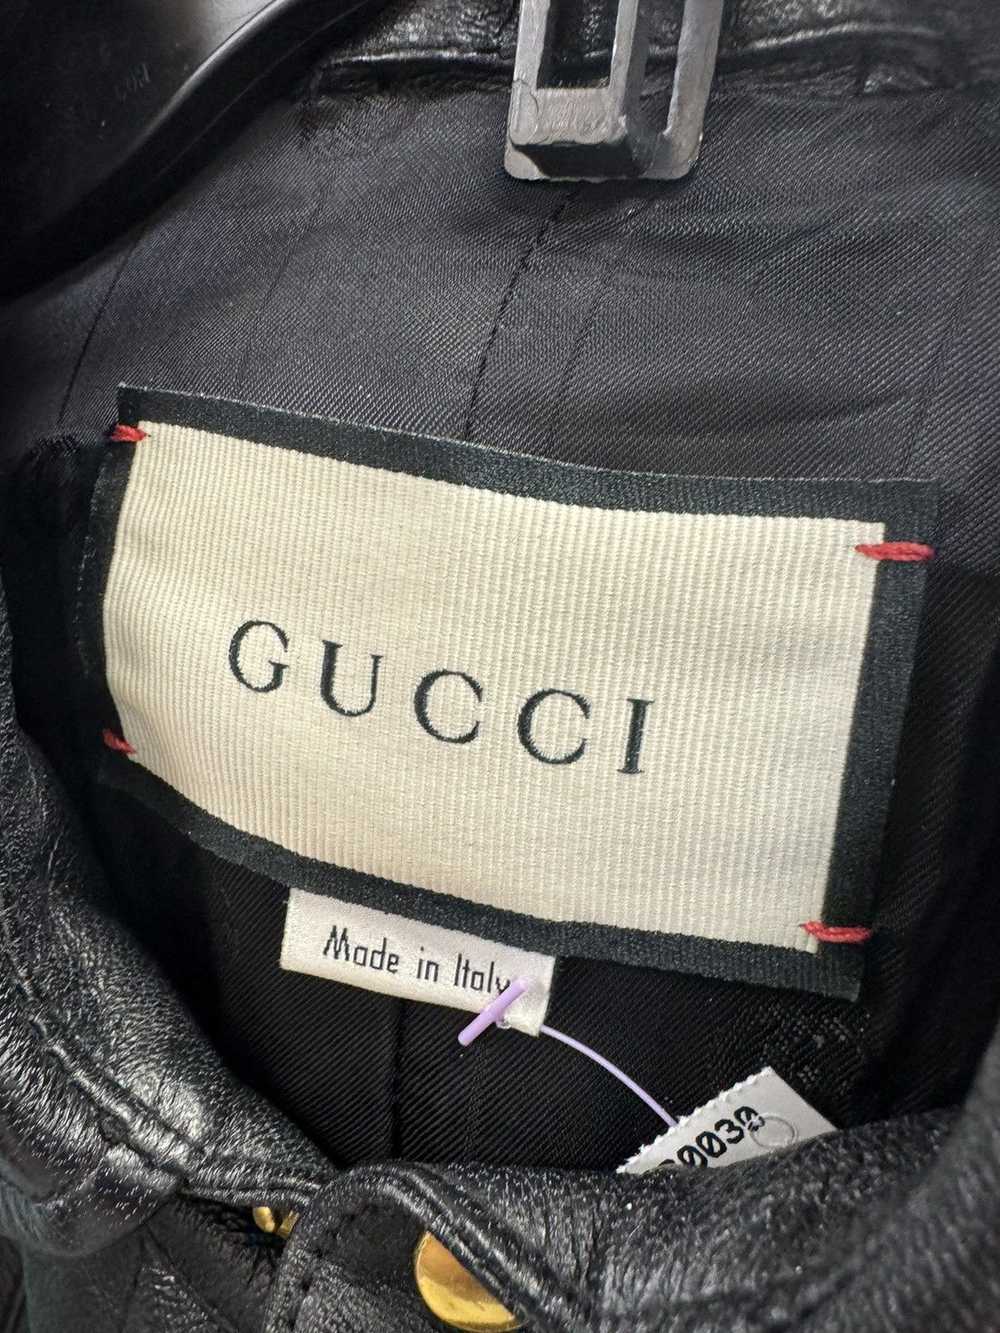 Gucci Gucci Leather Logo Jacket $3500 retail - image 4